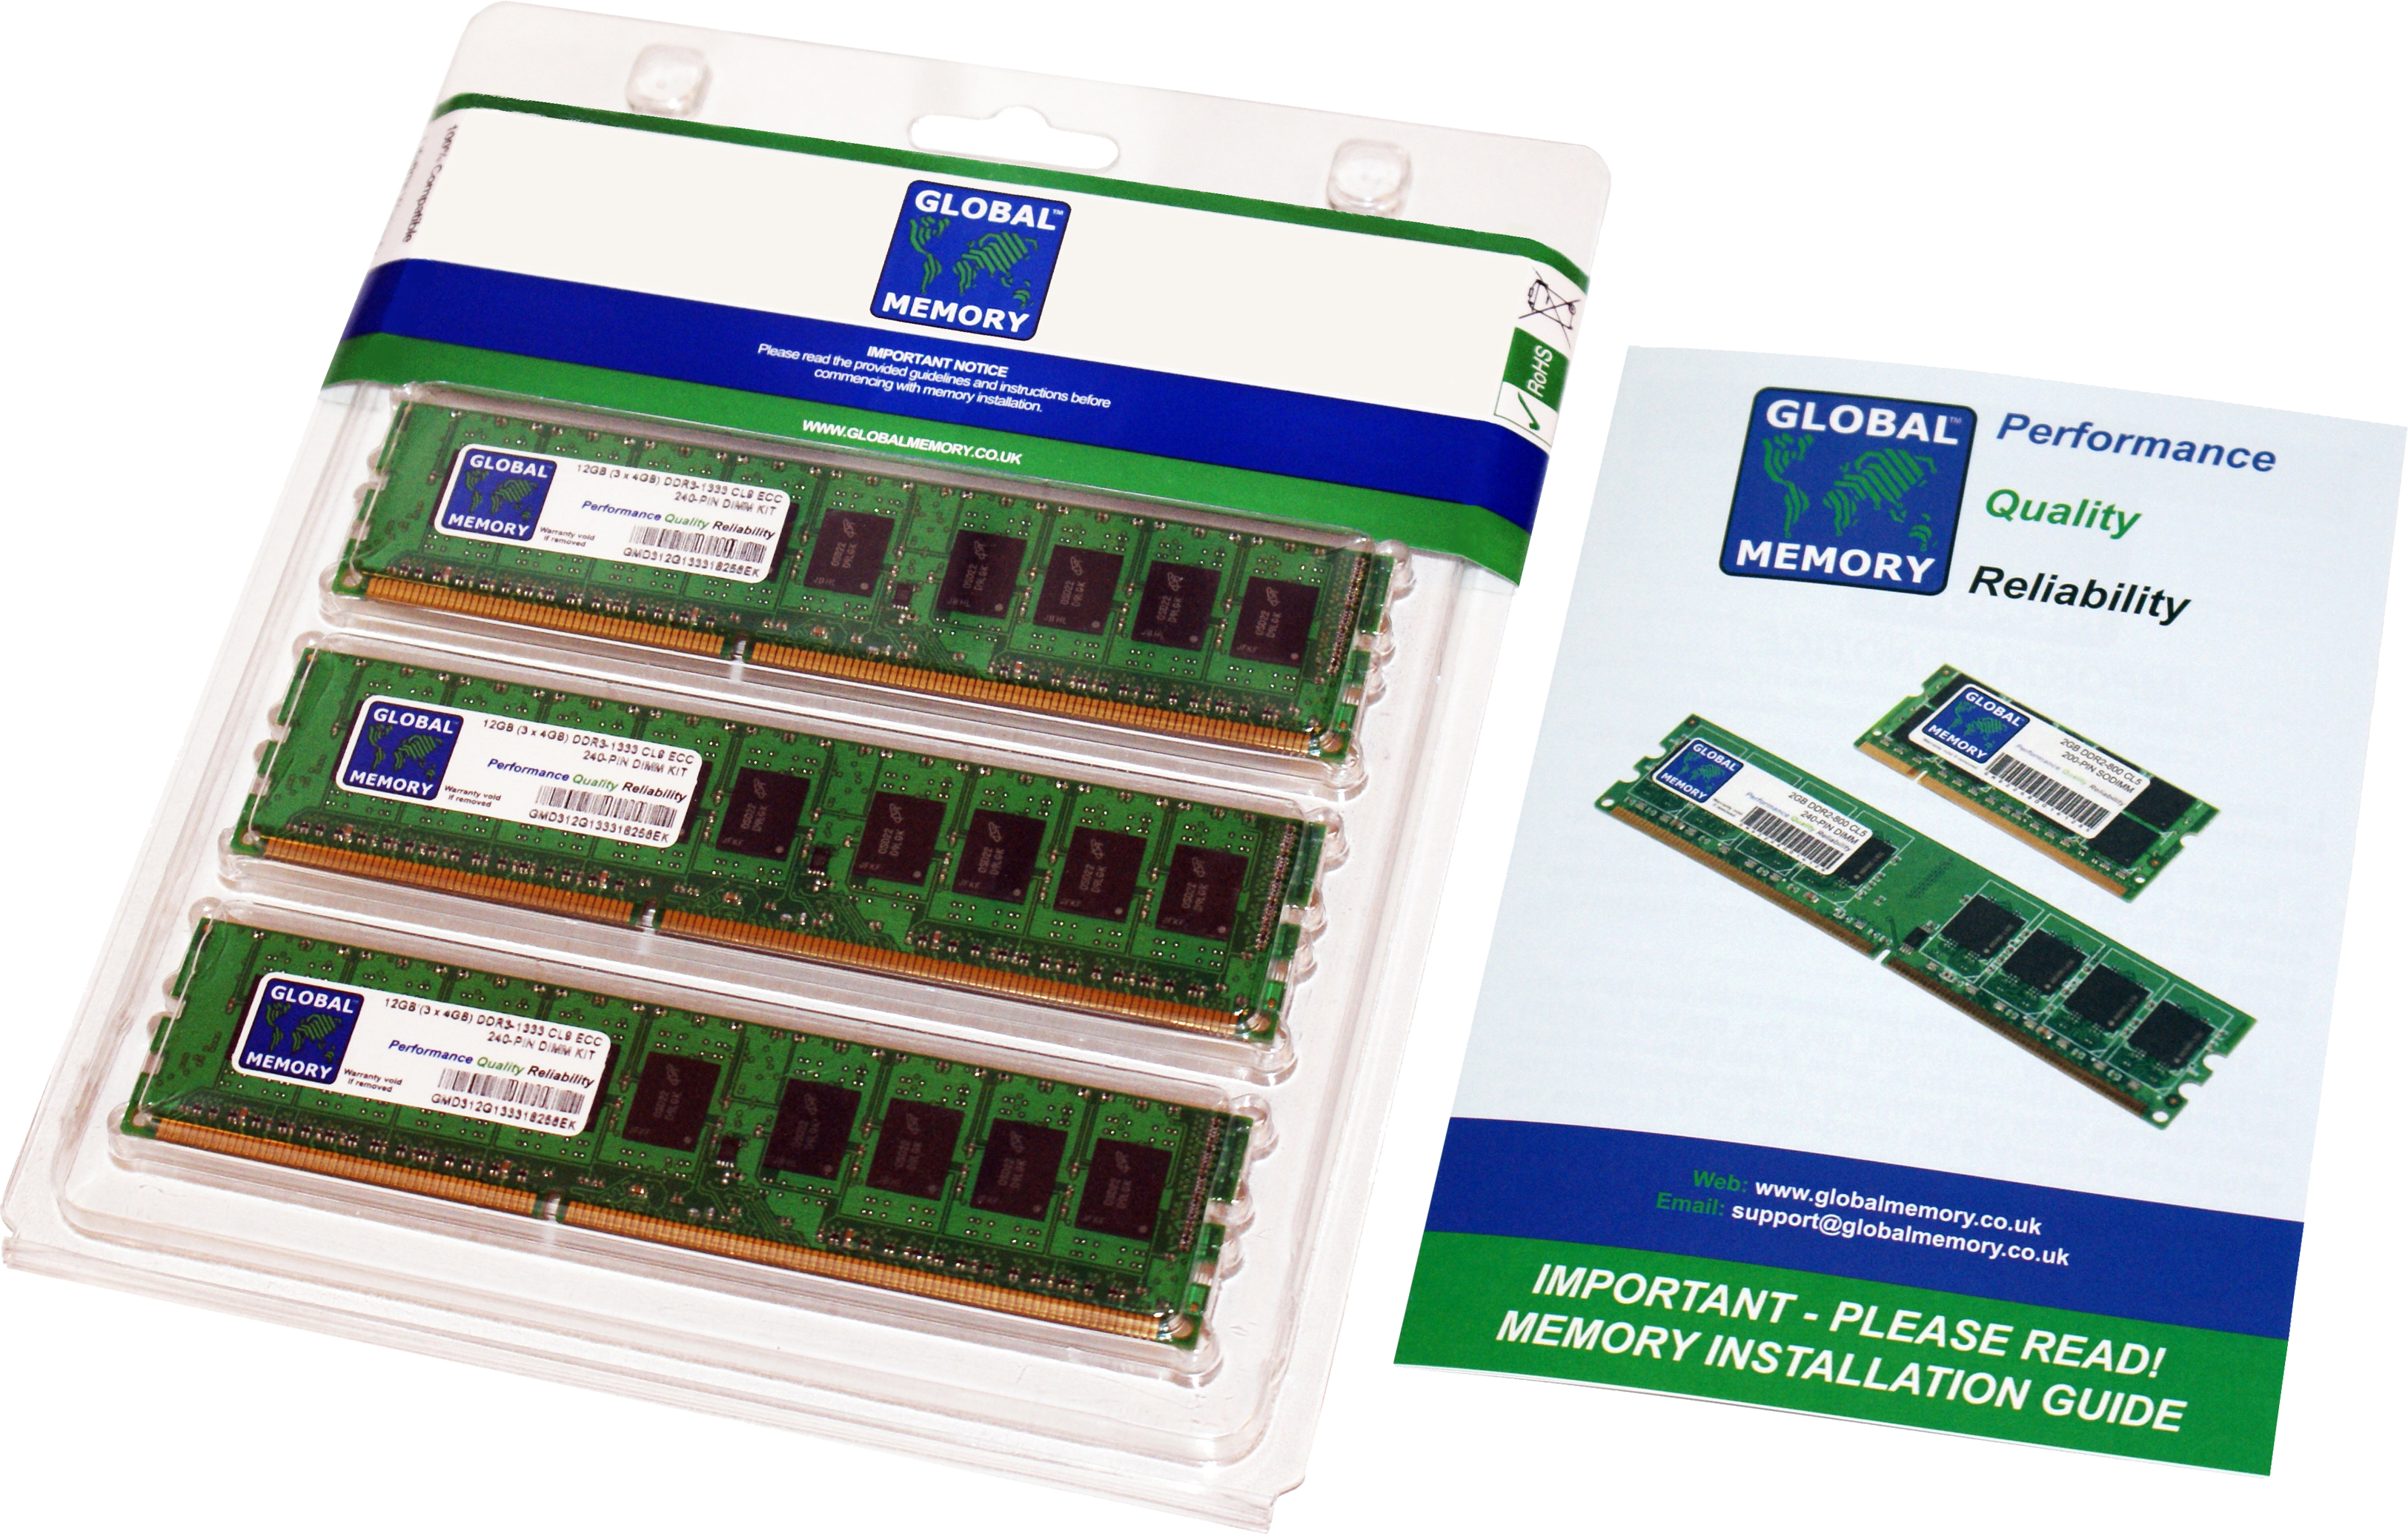 12GB (3 x 4GB) DDR3 1866MHz PC3-14900 240-PIN ECC DIMM (UDIMM) MEMORY RAM KIT FOR ACER SERVERS/WORKSTATIONS